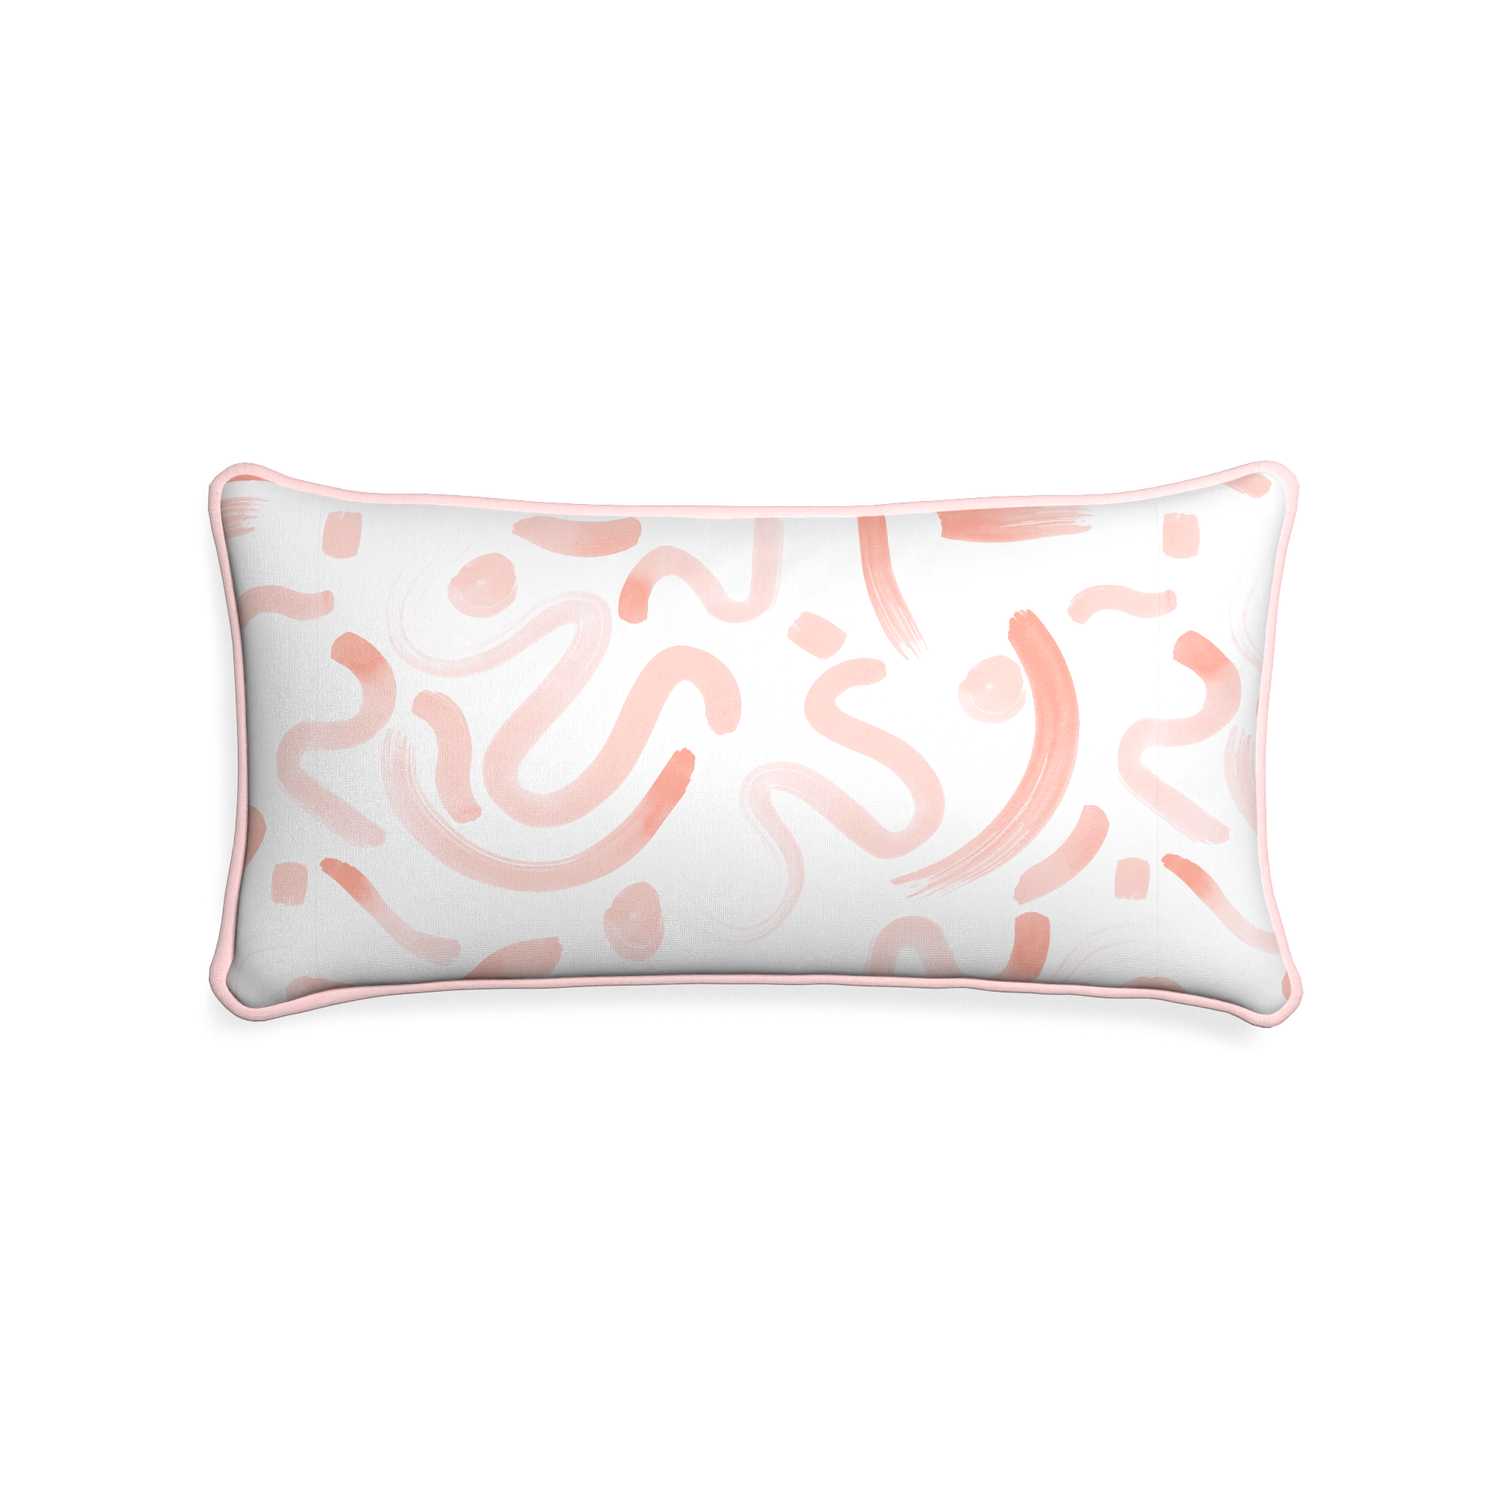 Midi-lumbar hockney pink custom pink graphicpillow with petal piping on white background